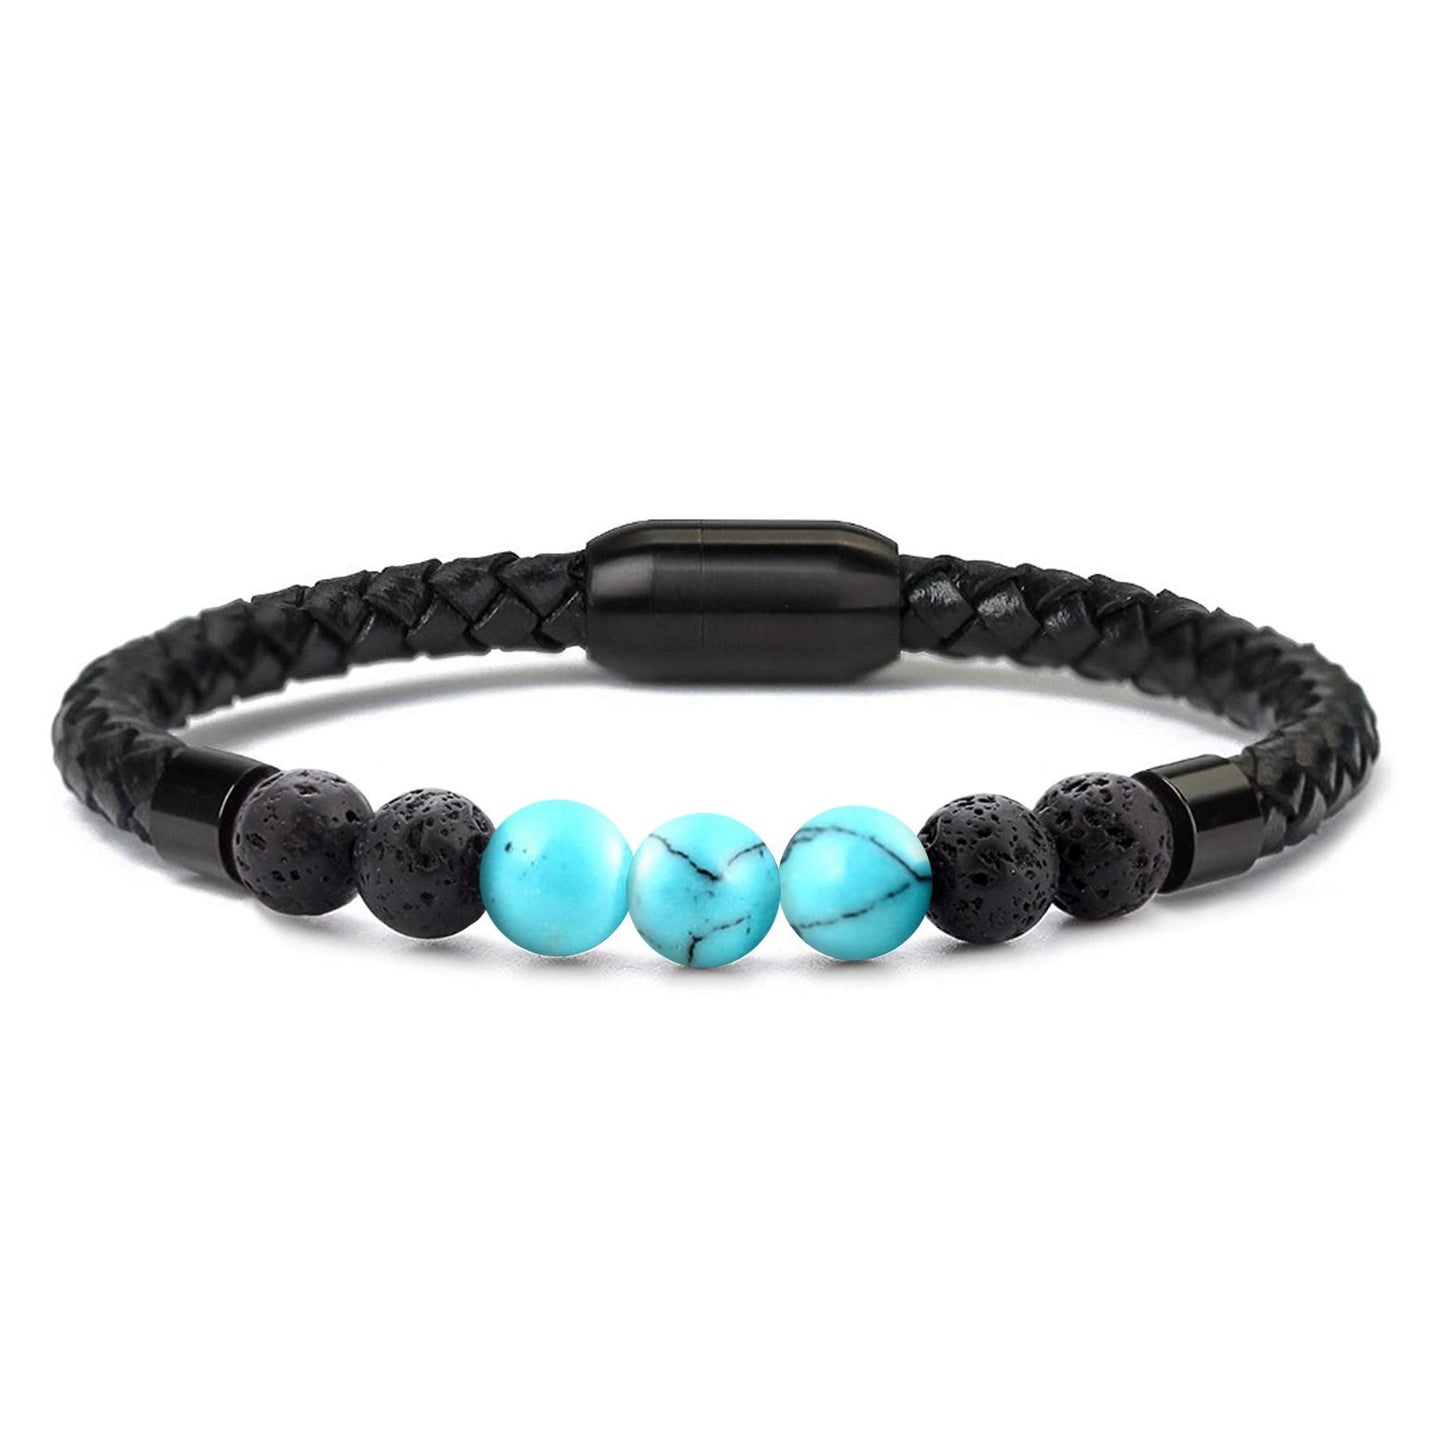 Men's Akor Men's Natural Healing Stone Leather Bracelet with Magnetic Closure Leather Turquoise Stainless Steel Ivory